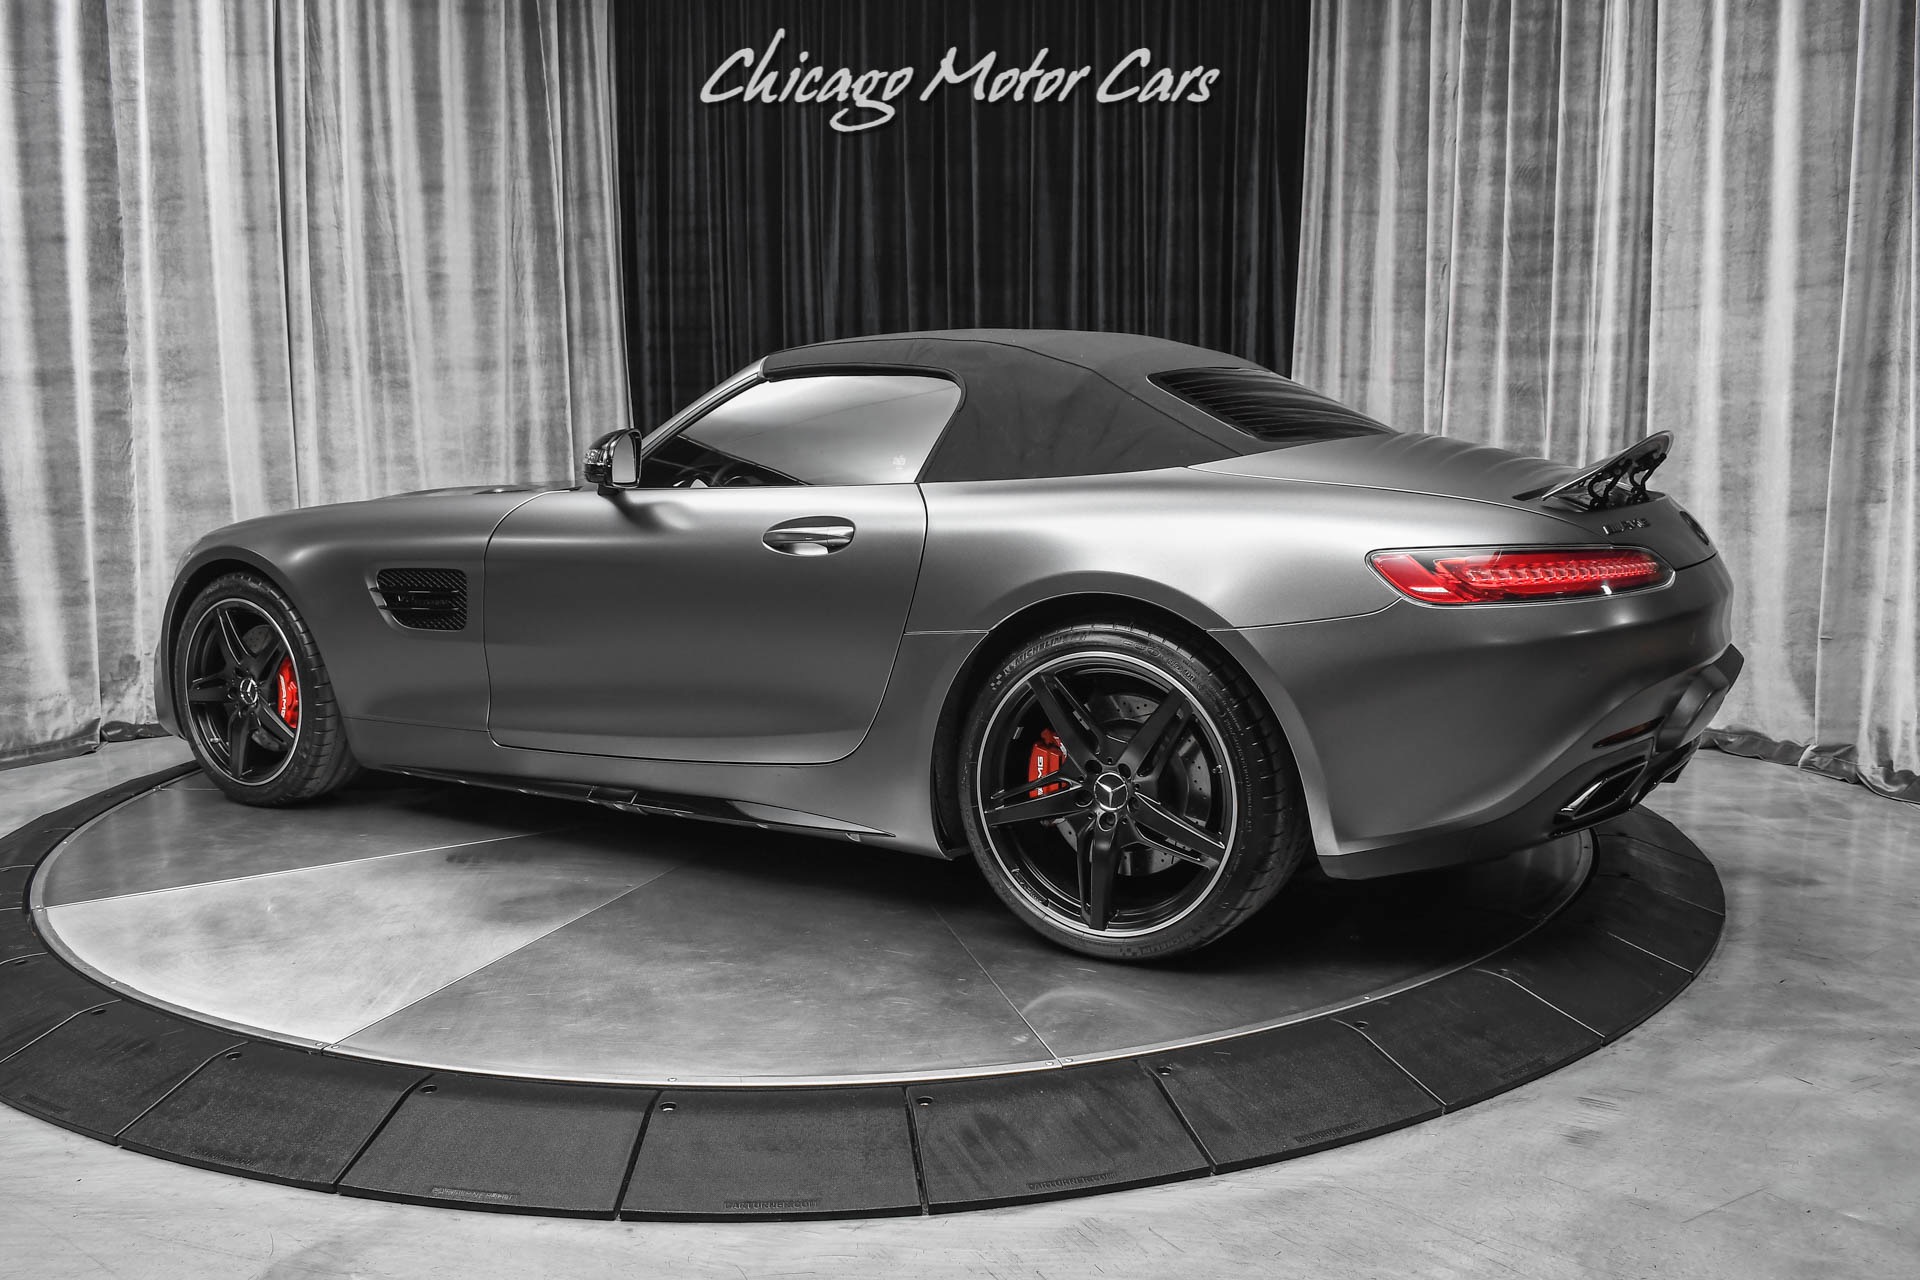 Used-2018-Mercedes-Benz-AMG-GT-ROADSTER-Convertible-8k-Miles-Hot-Spec-Exclusive-Interior-Pack-LOADED